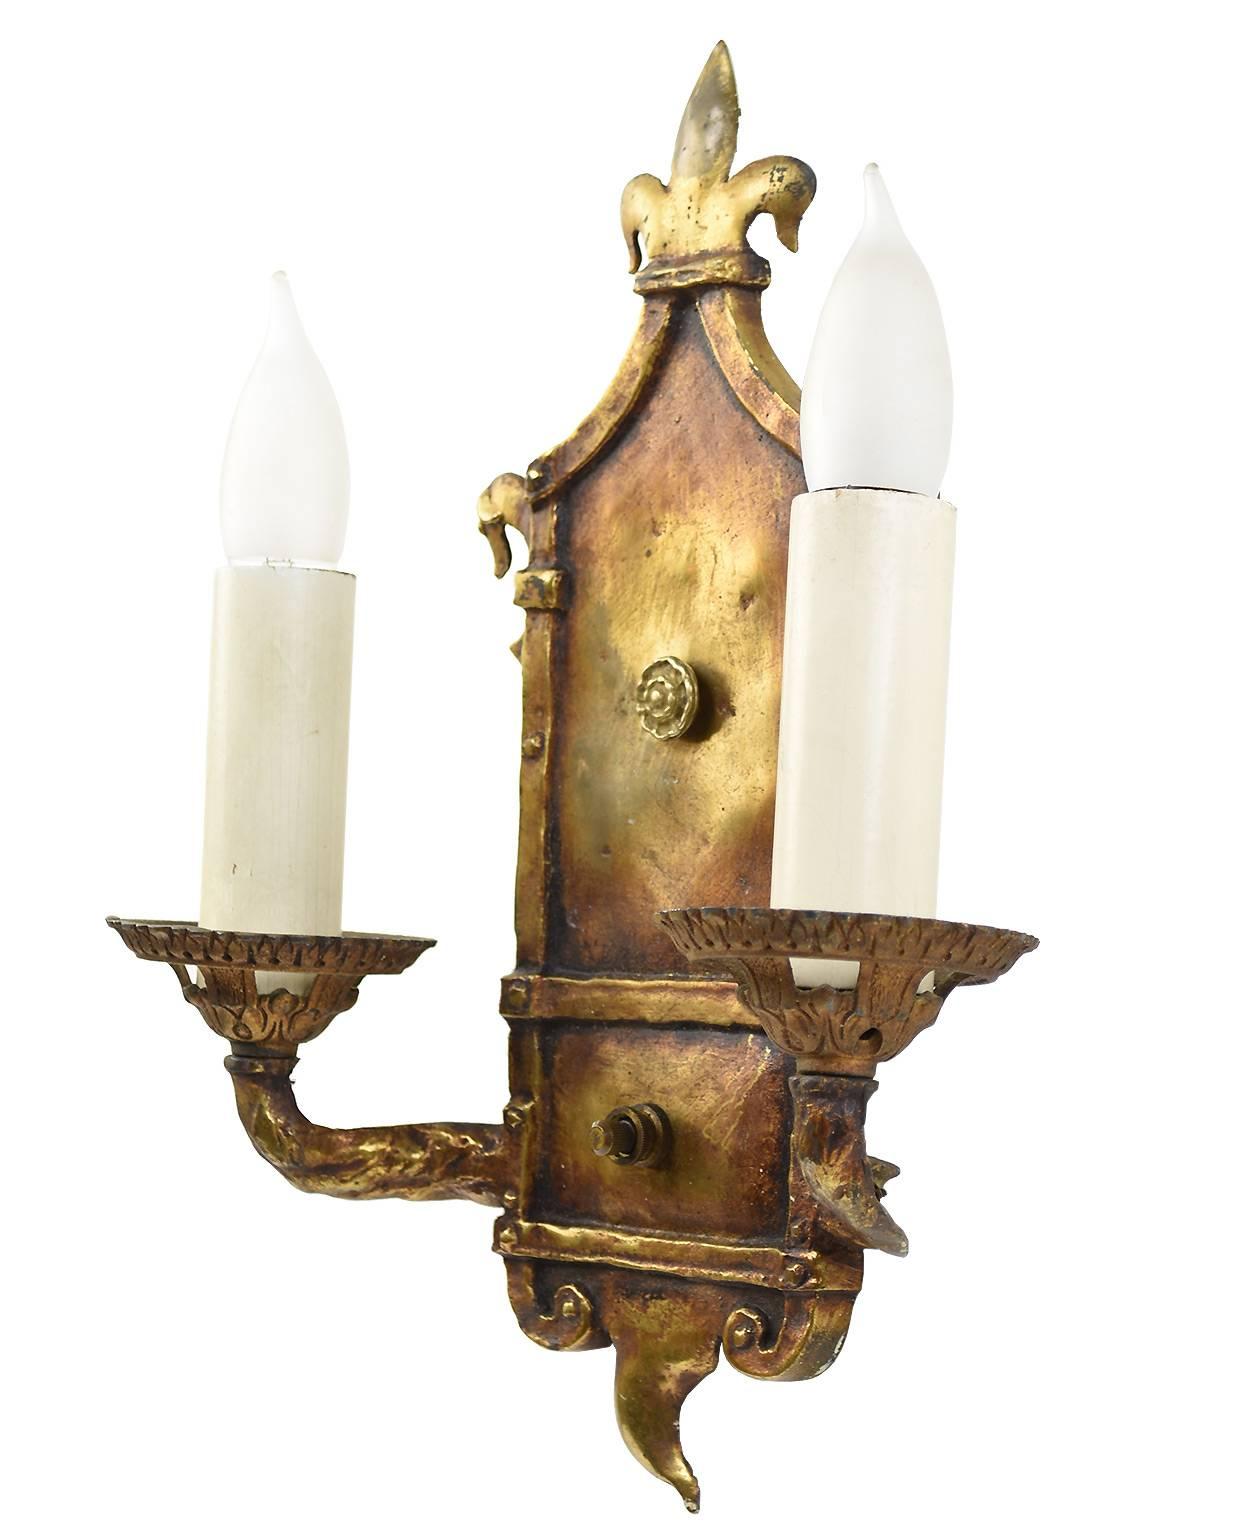 This set of four sconces feature fine metal work and a perfect antique patina. Each sconce is signed M. Leonard, BBW.

We find that early antique lighting was designed as objects of art and we treat each fixture with careful attention to preserve